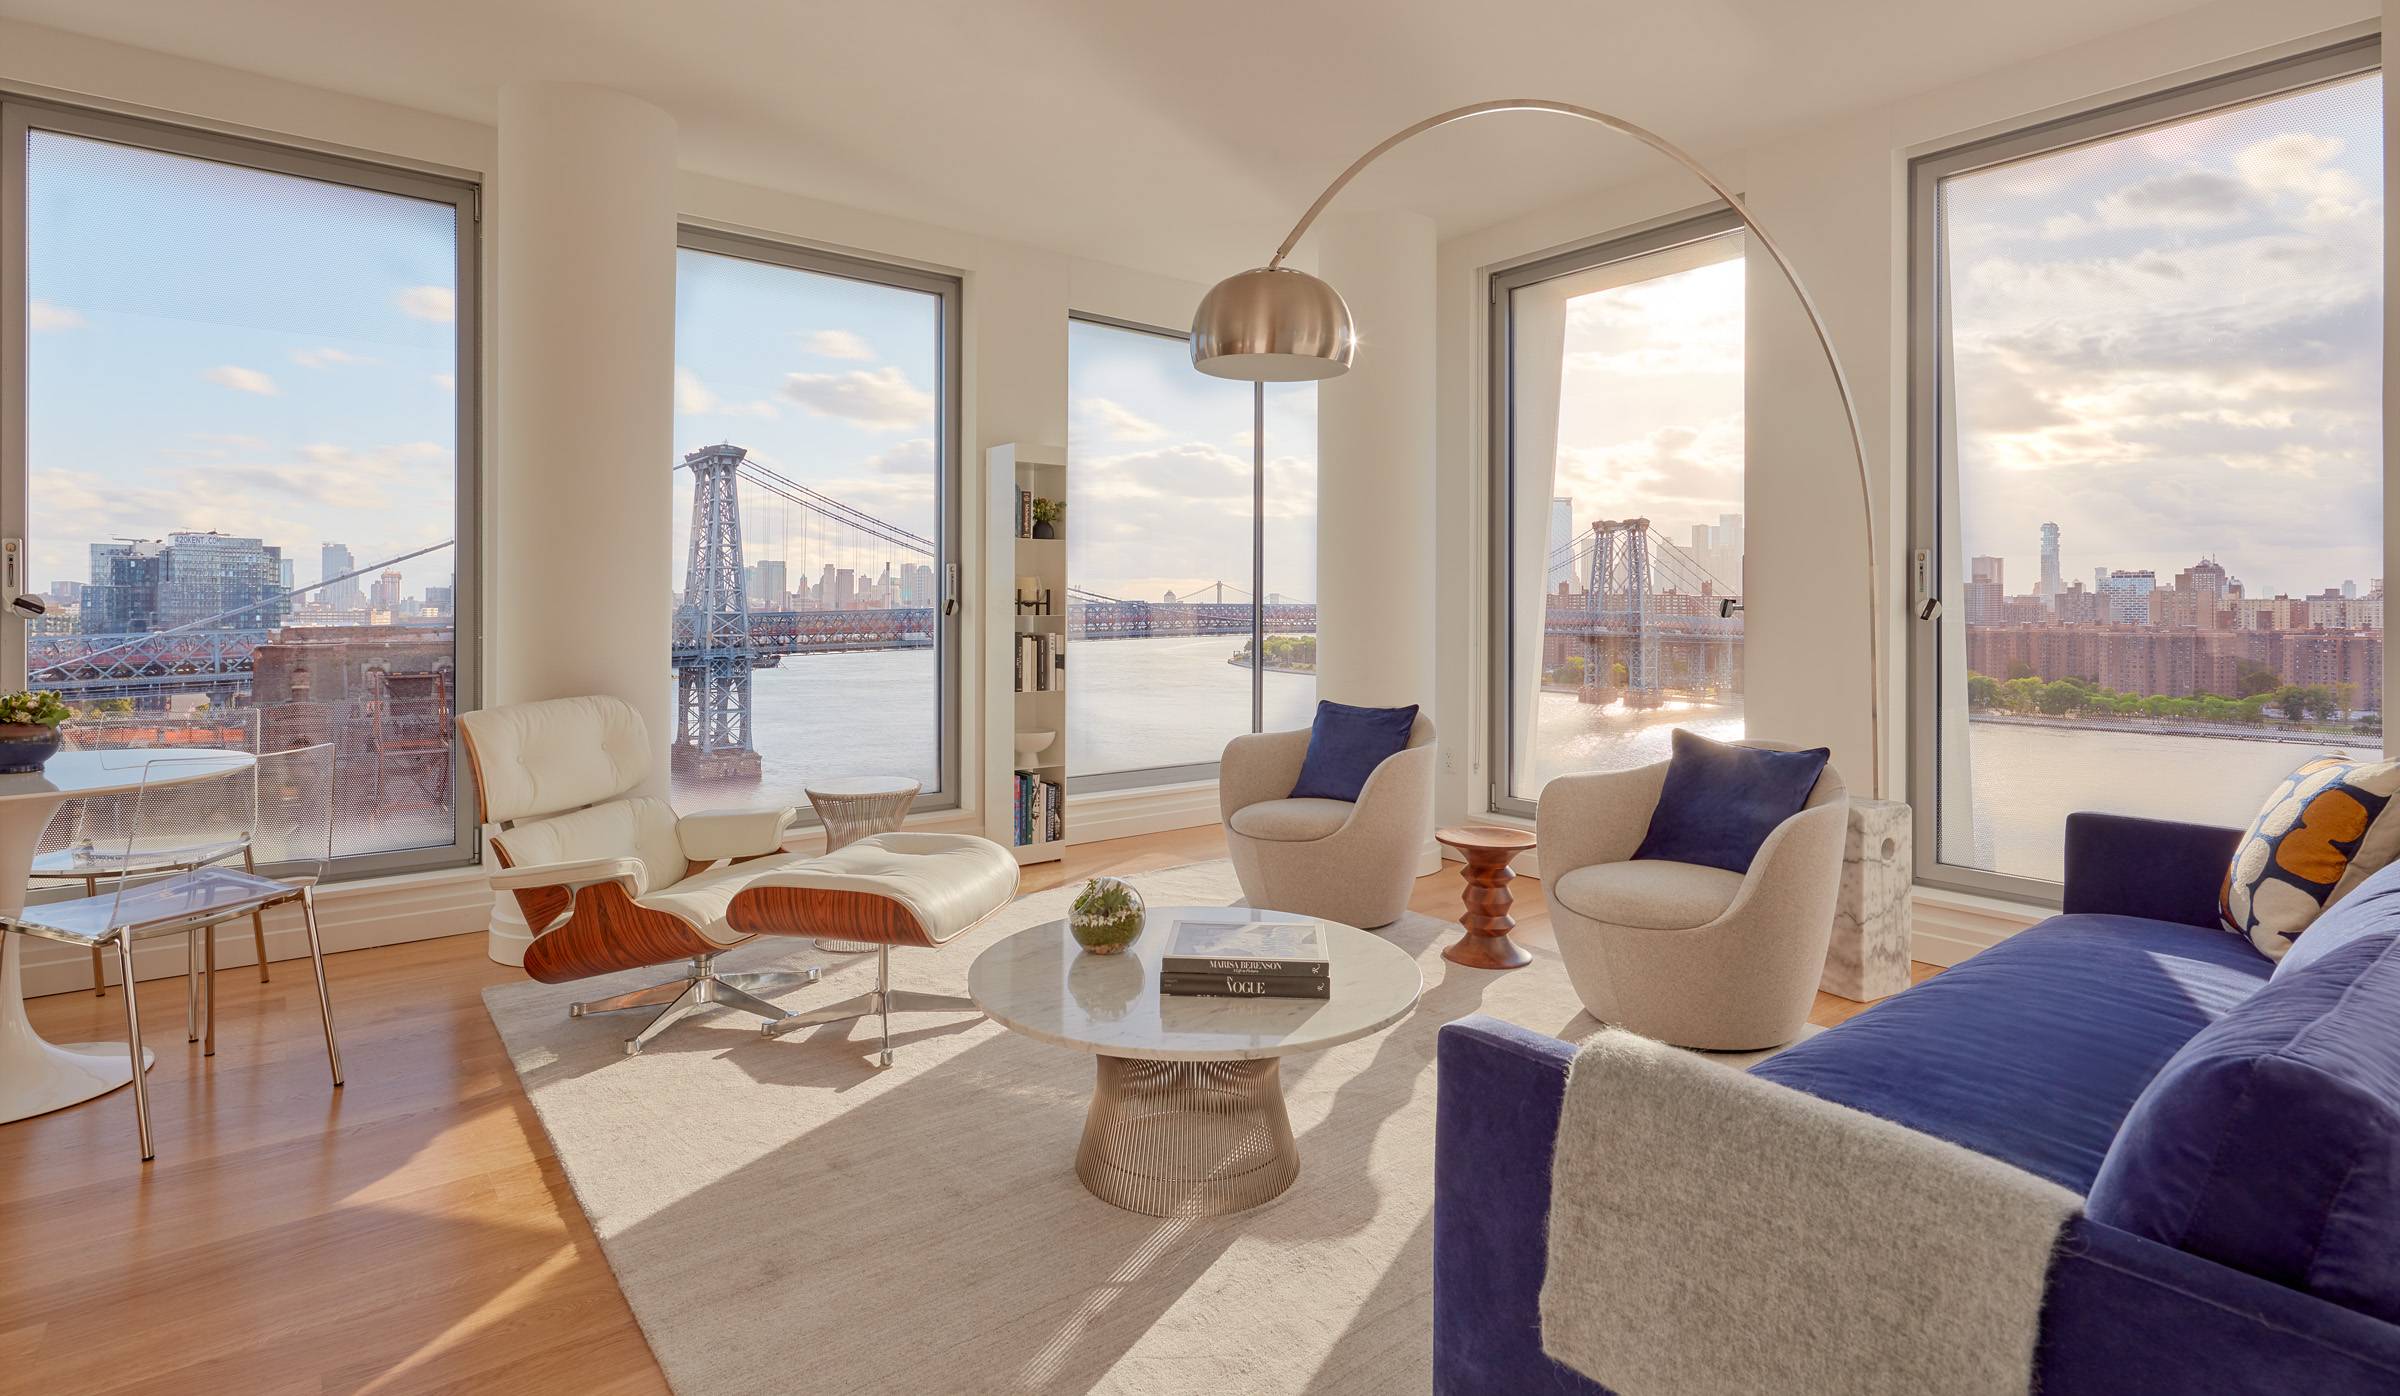 Open & Airy Waterfront 2BR/2BA w/ Sweeping Skyline Views